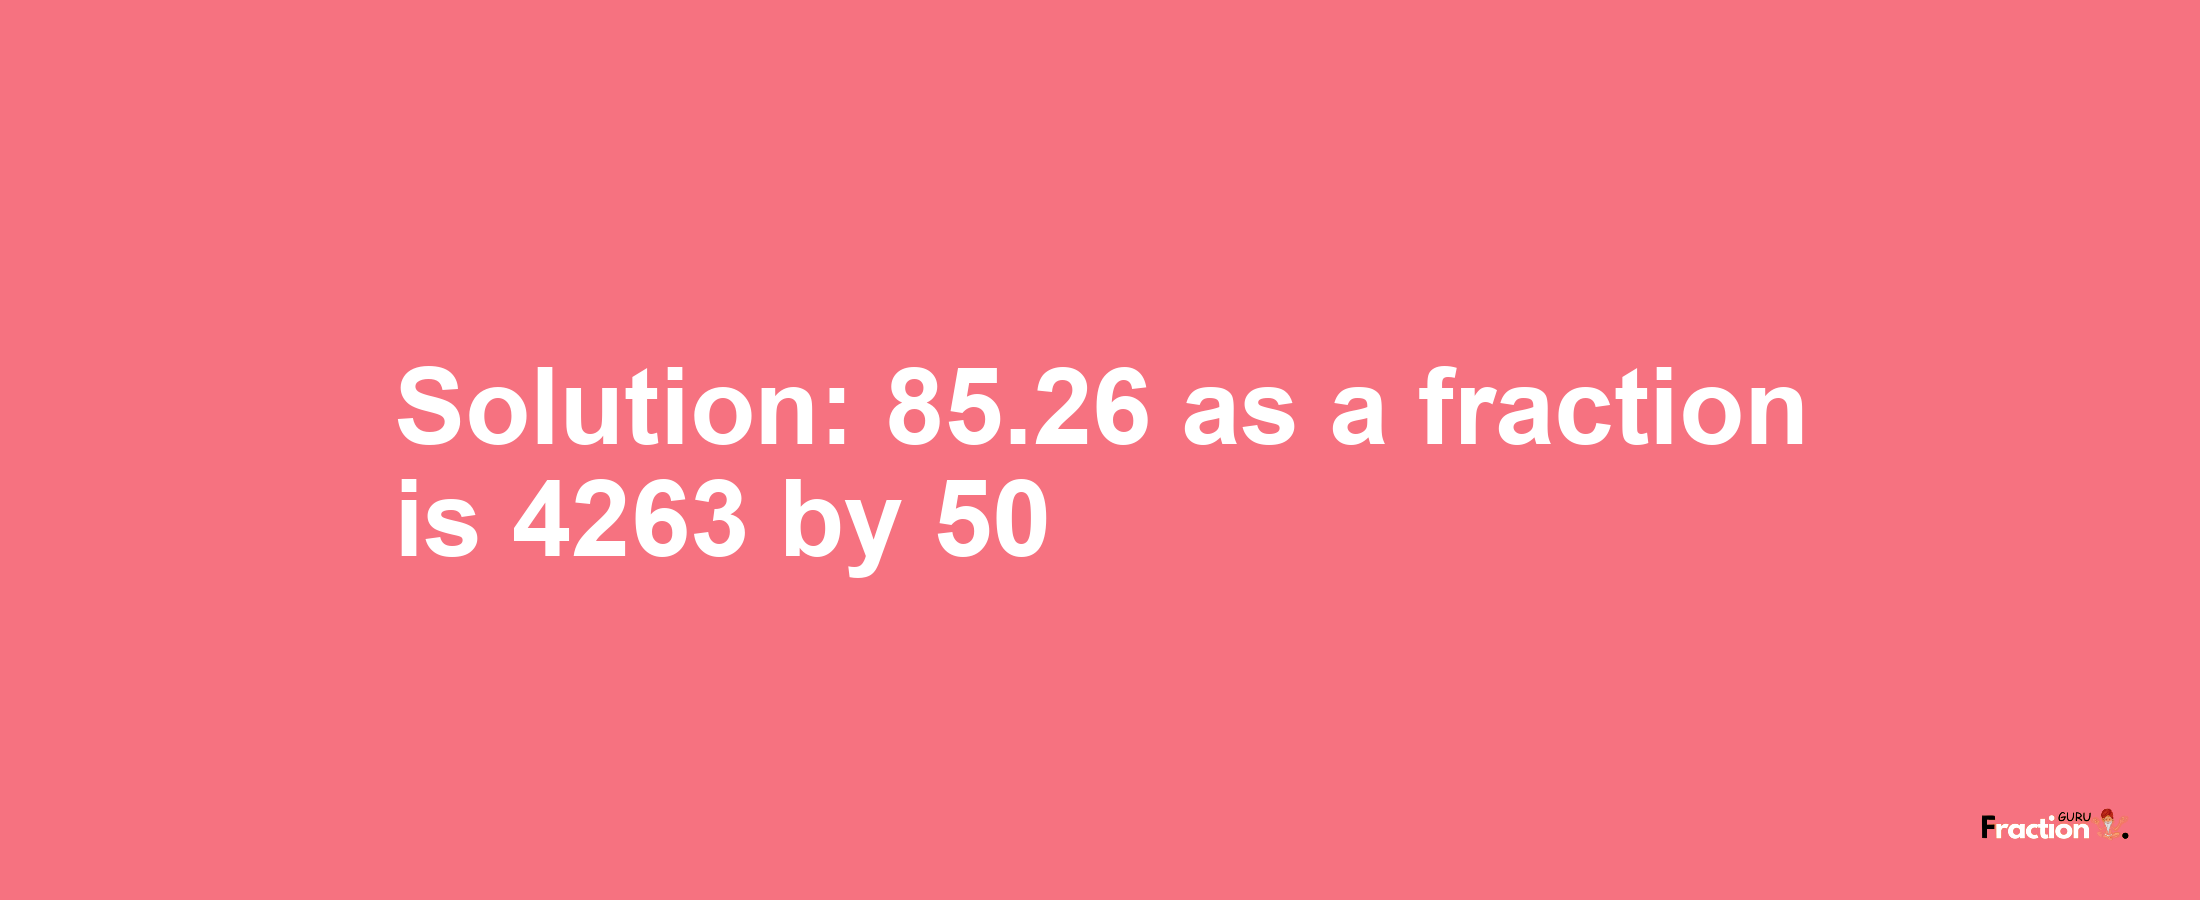 Solution:85.26 as a fraction is 4263/50